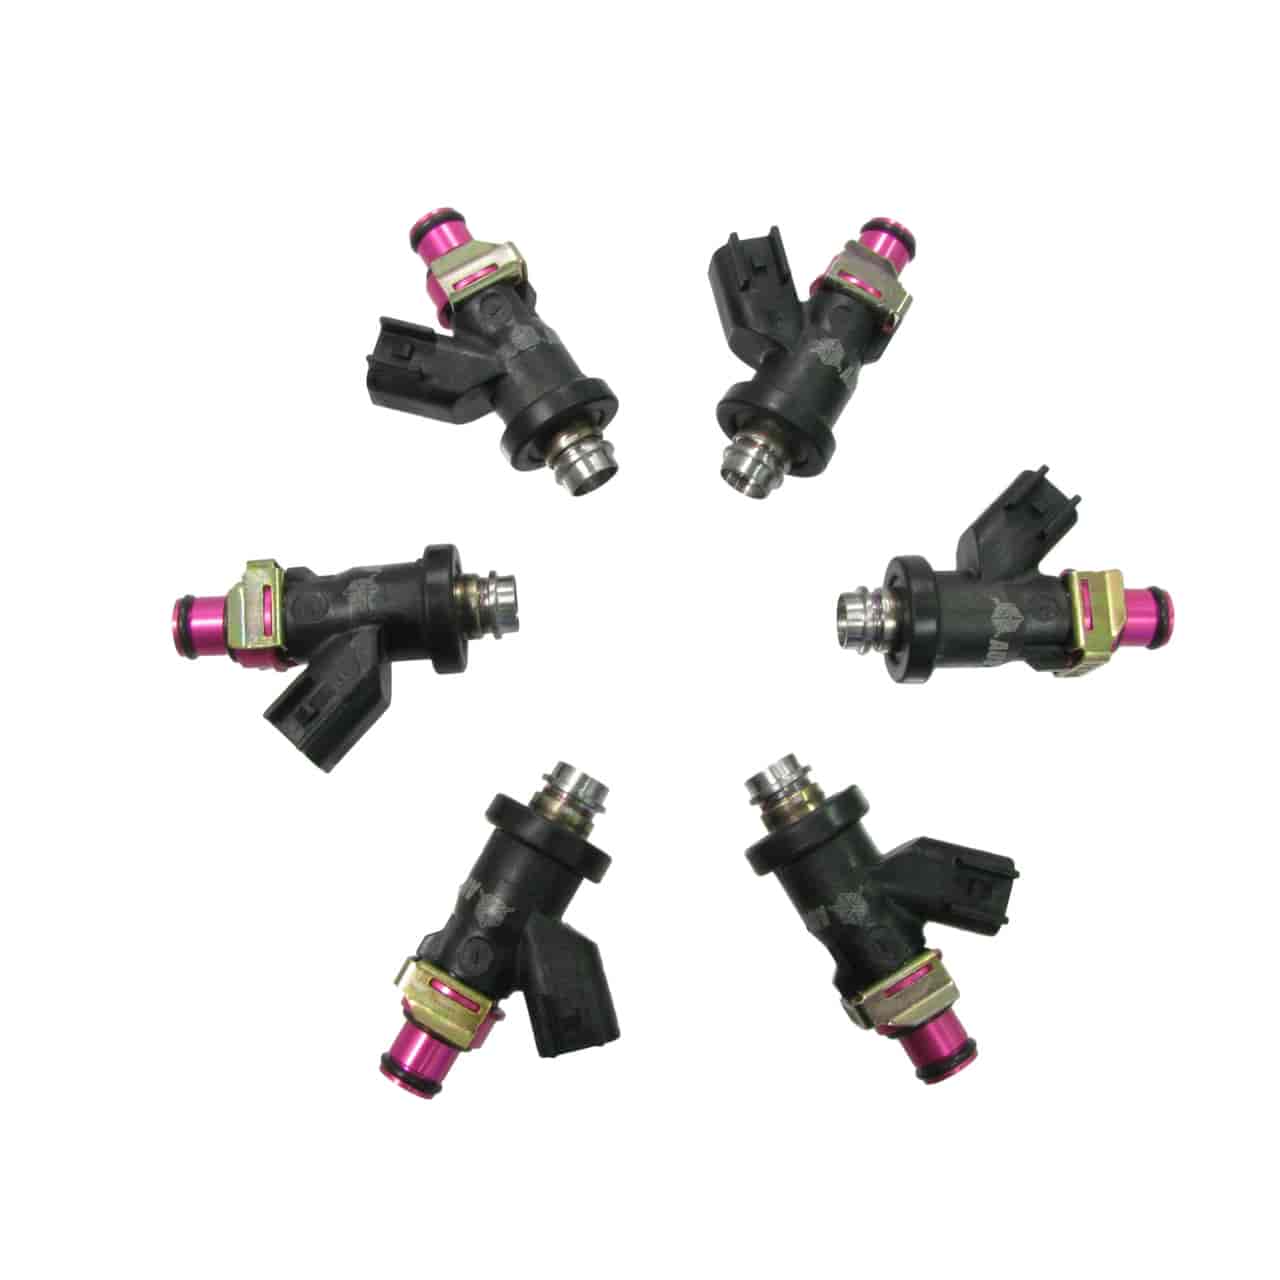 Fuel Injector Kit set of 6 152Ibs/Hr @